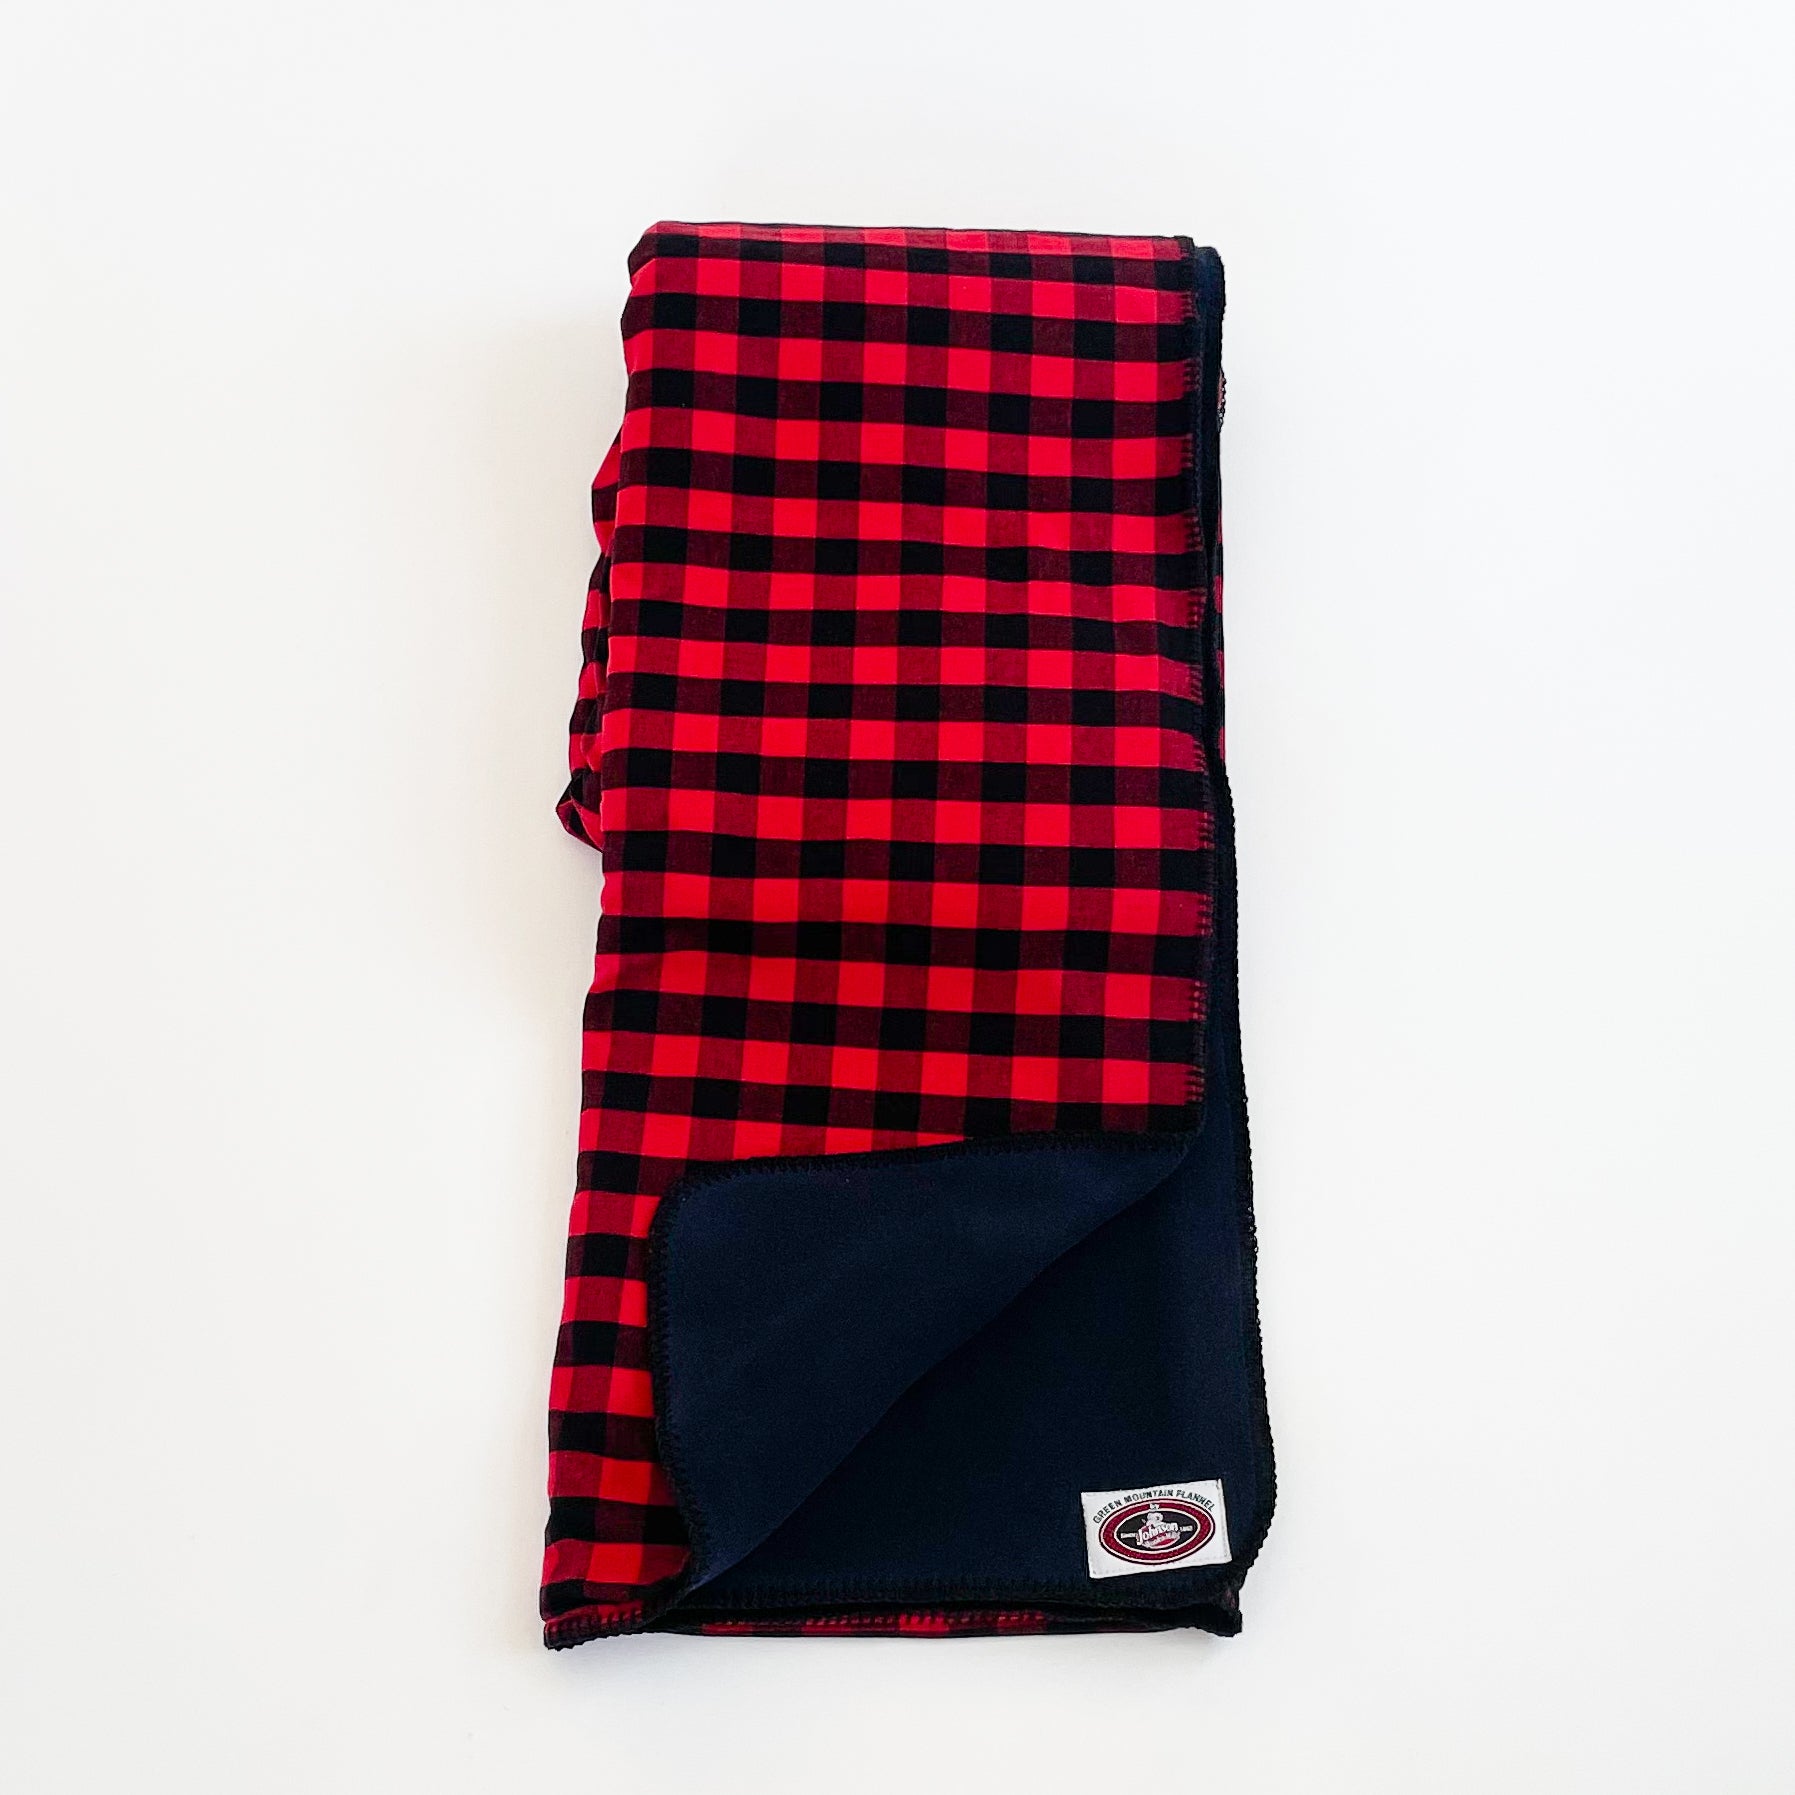 Green Mountain Flannel Throw Red & Black Buffalo squares with black fleece lining open corner view